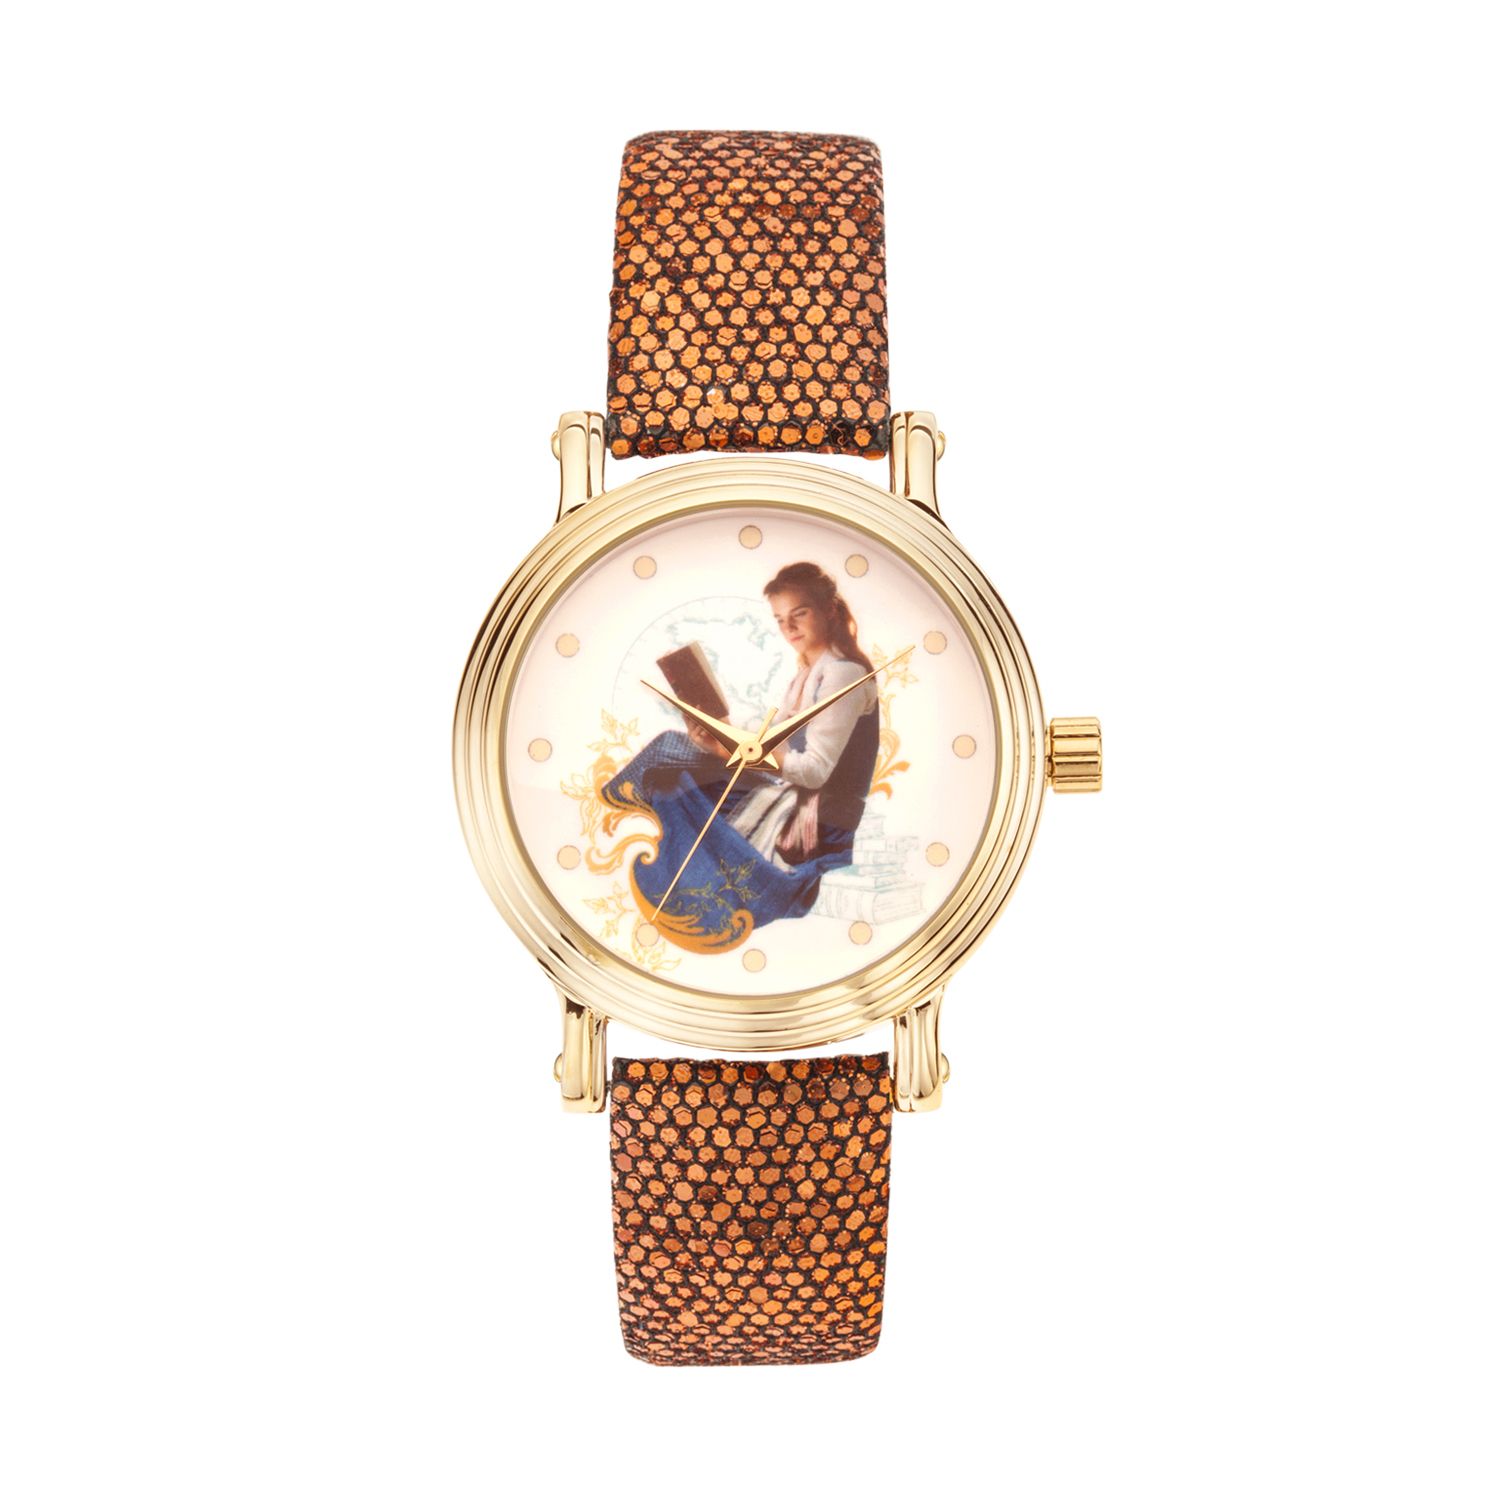 Image for Disney 's Beauty and the Beast Princess Belle Women's Sequin Leather Watch at Kohl's.